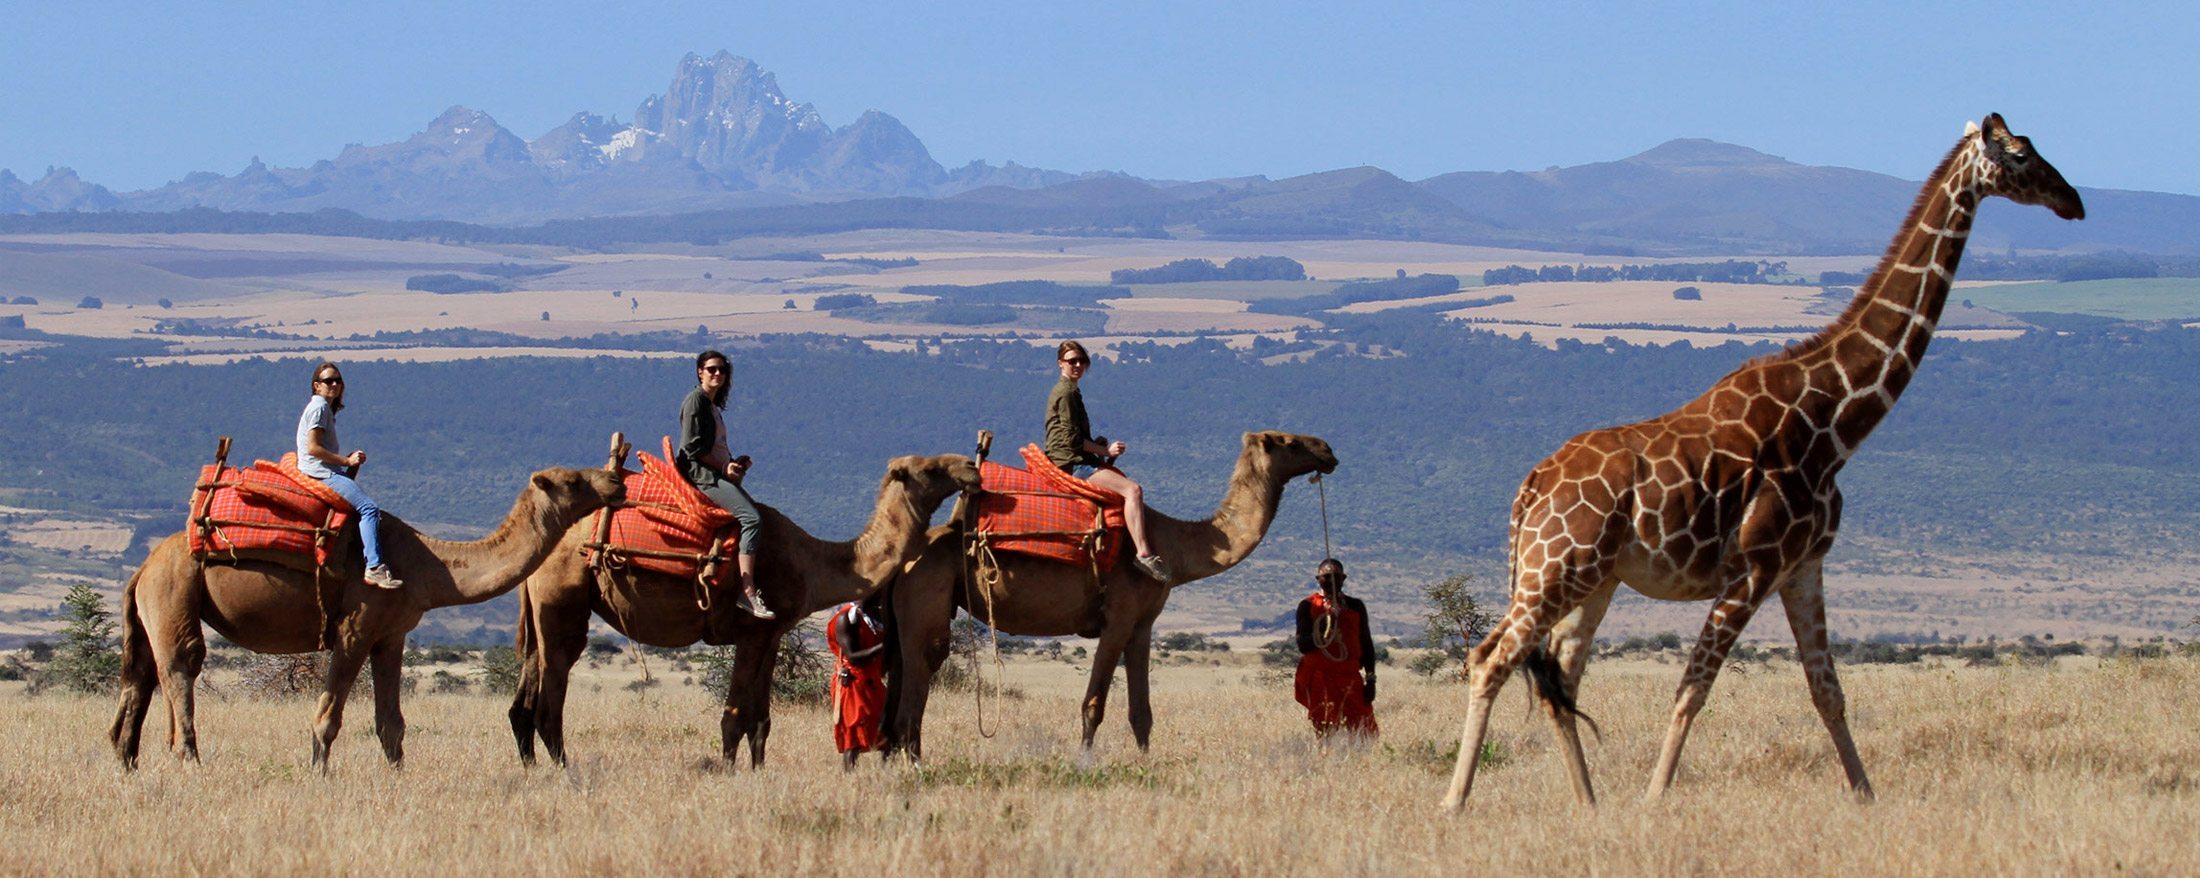 Why do people go to Kenya for a safari?